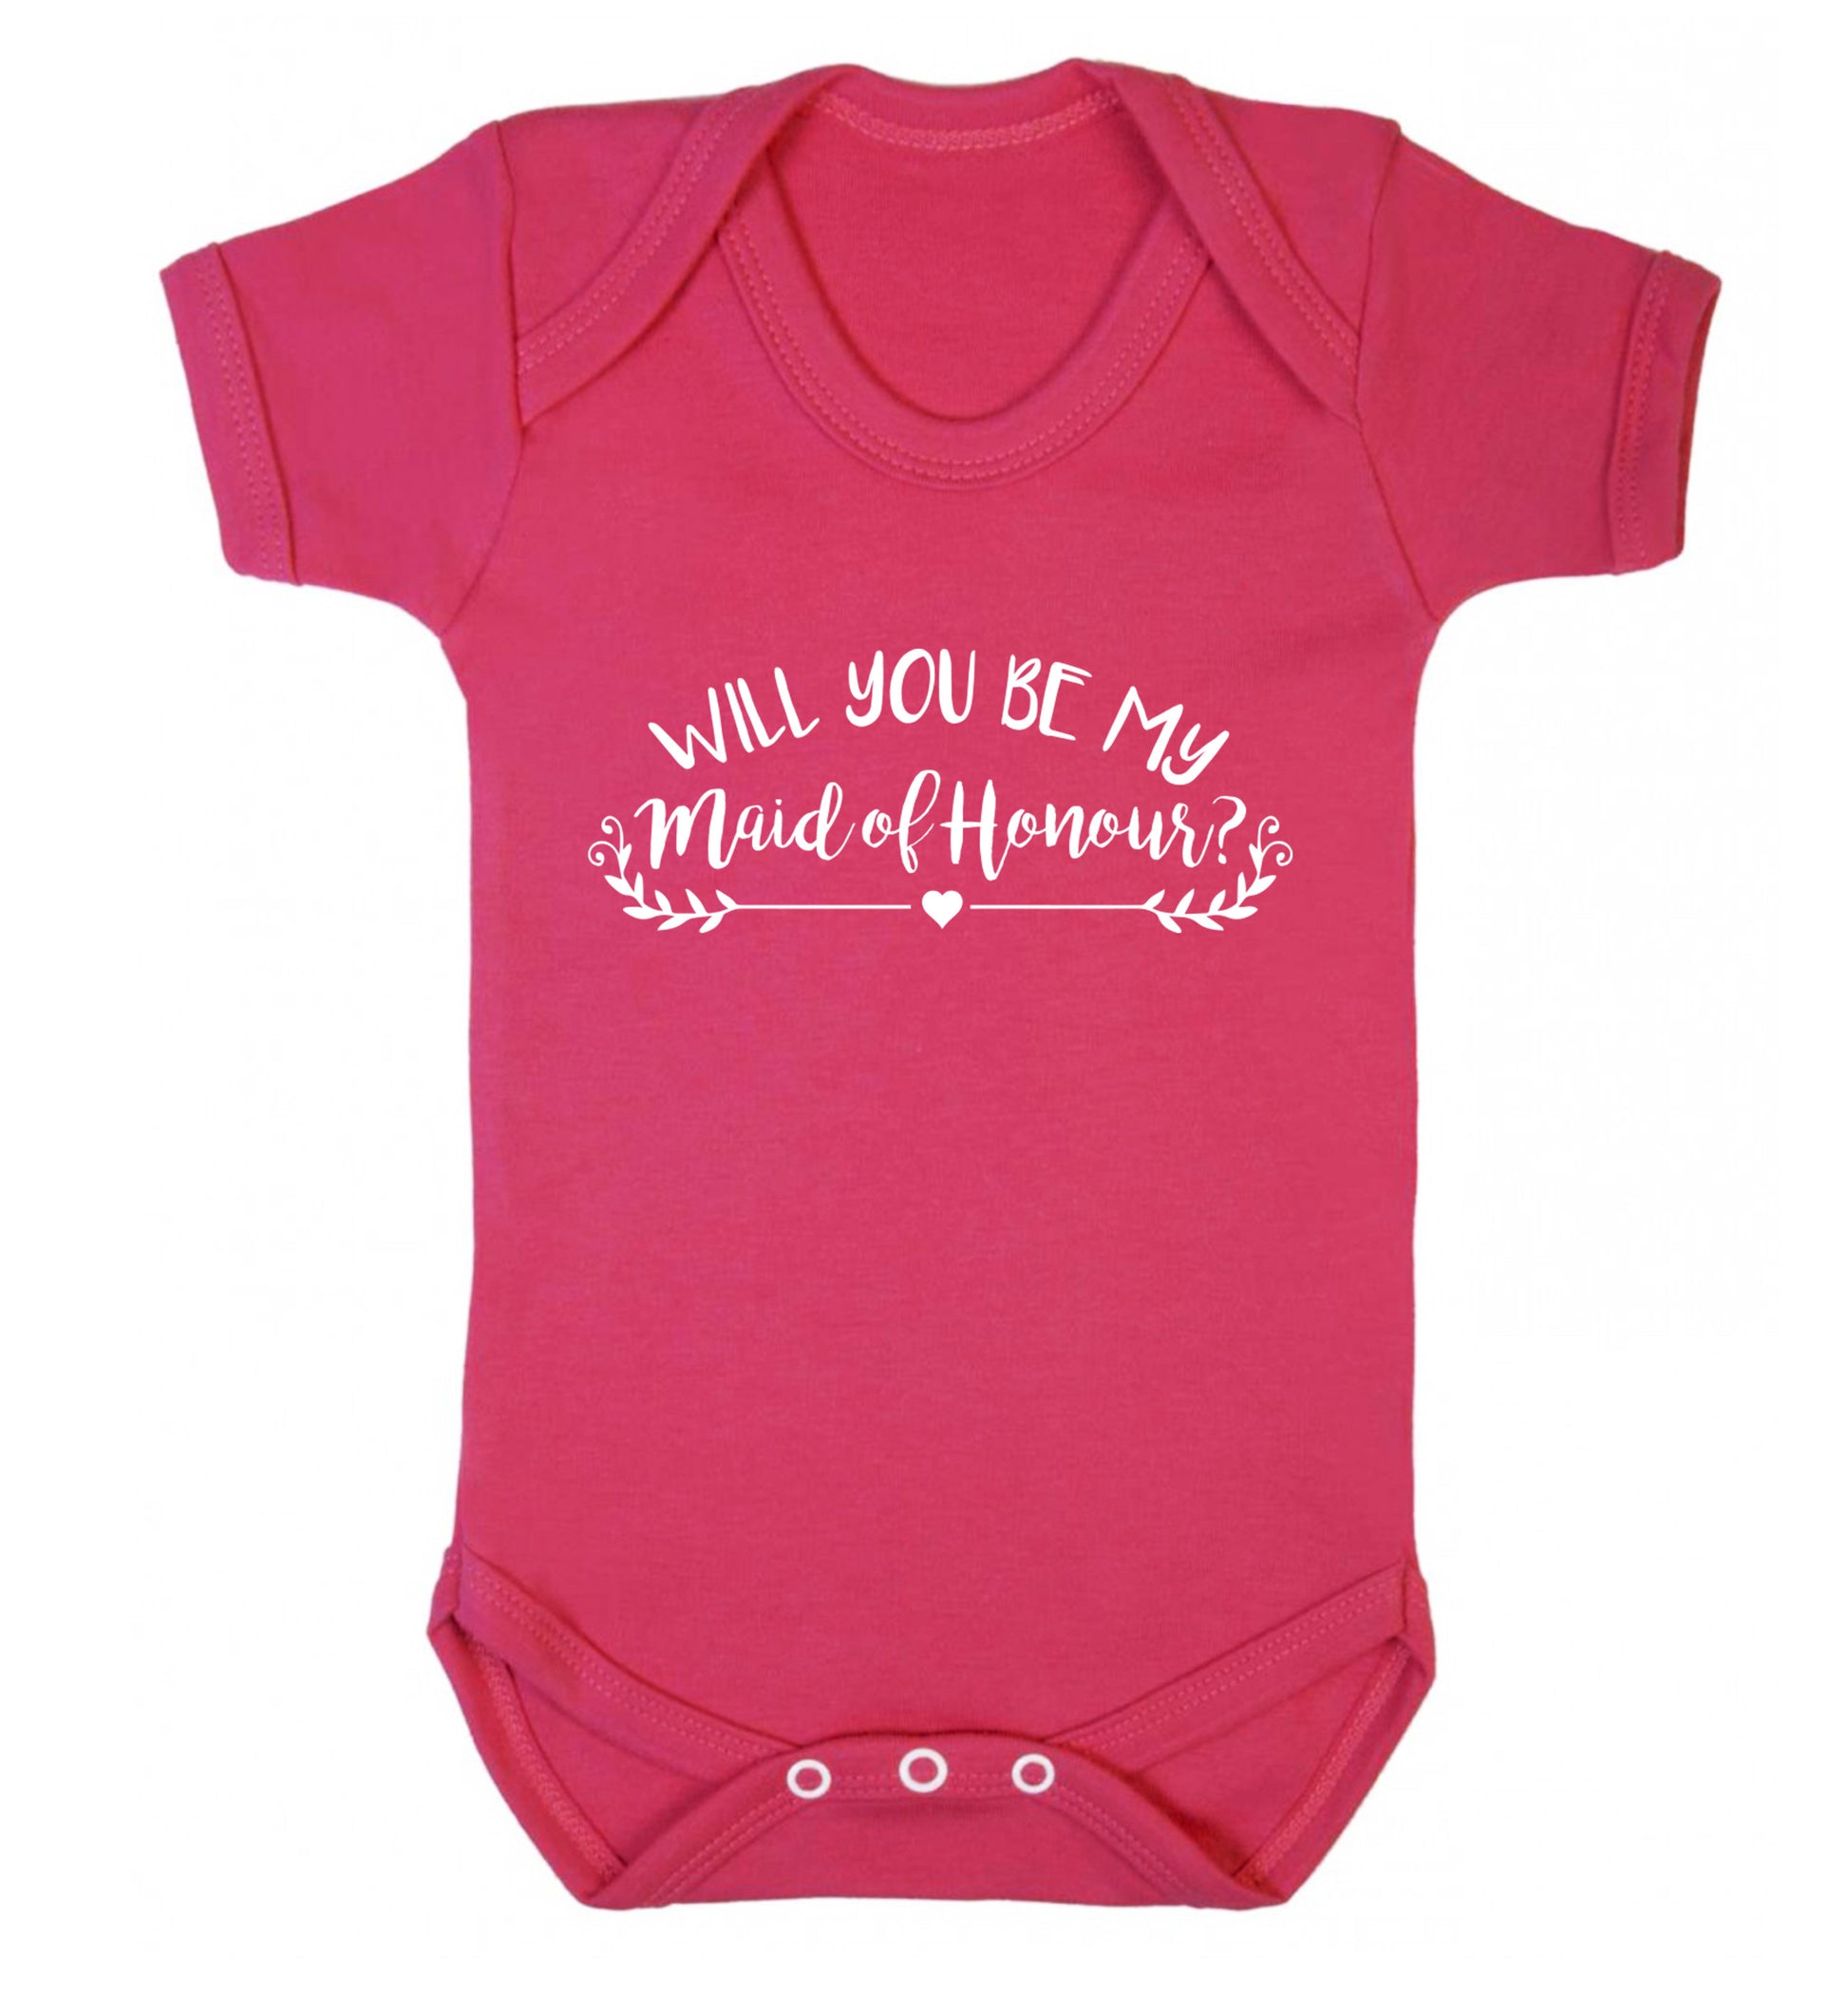 Will you be my maid of honour? Baby Vest dark pink 18-24 months